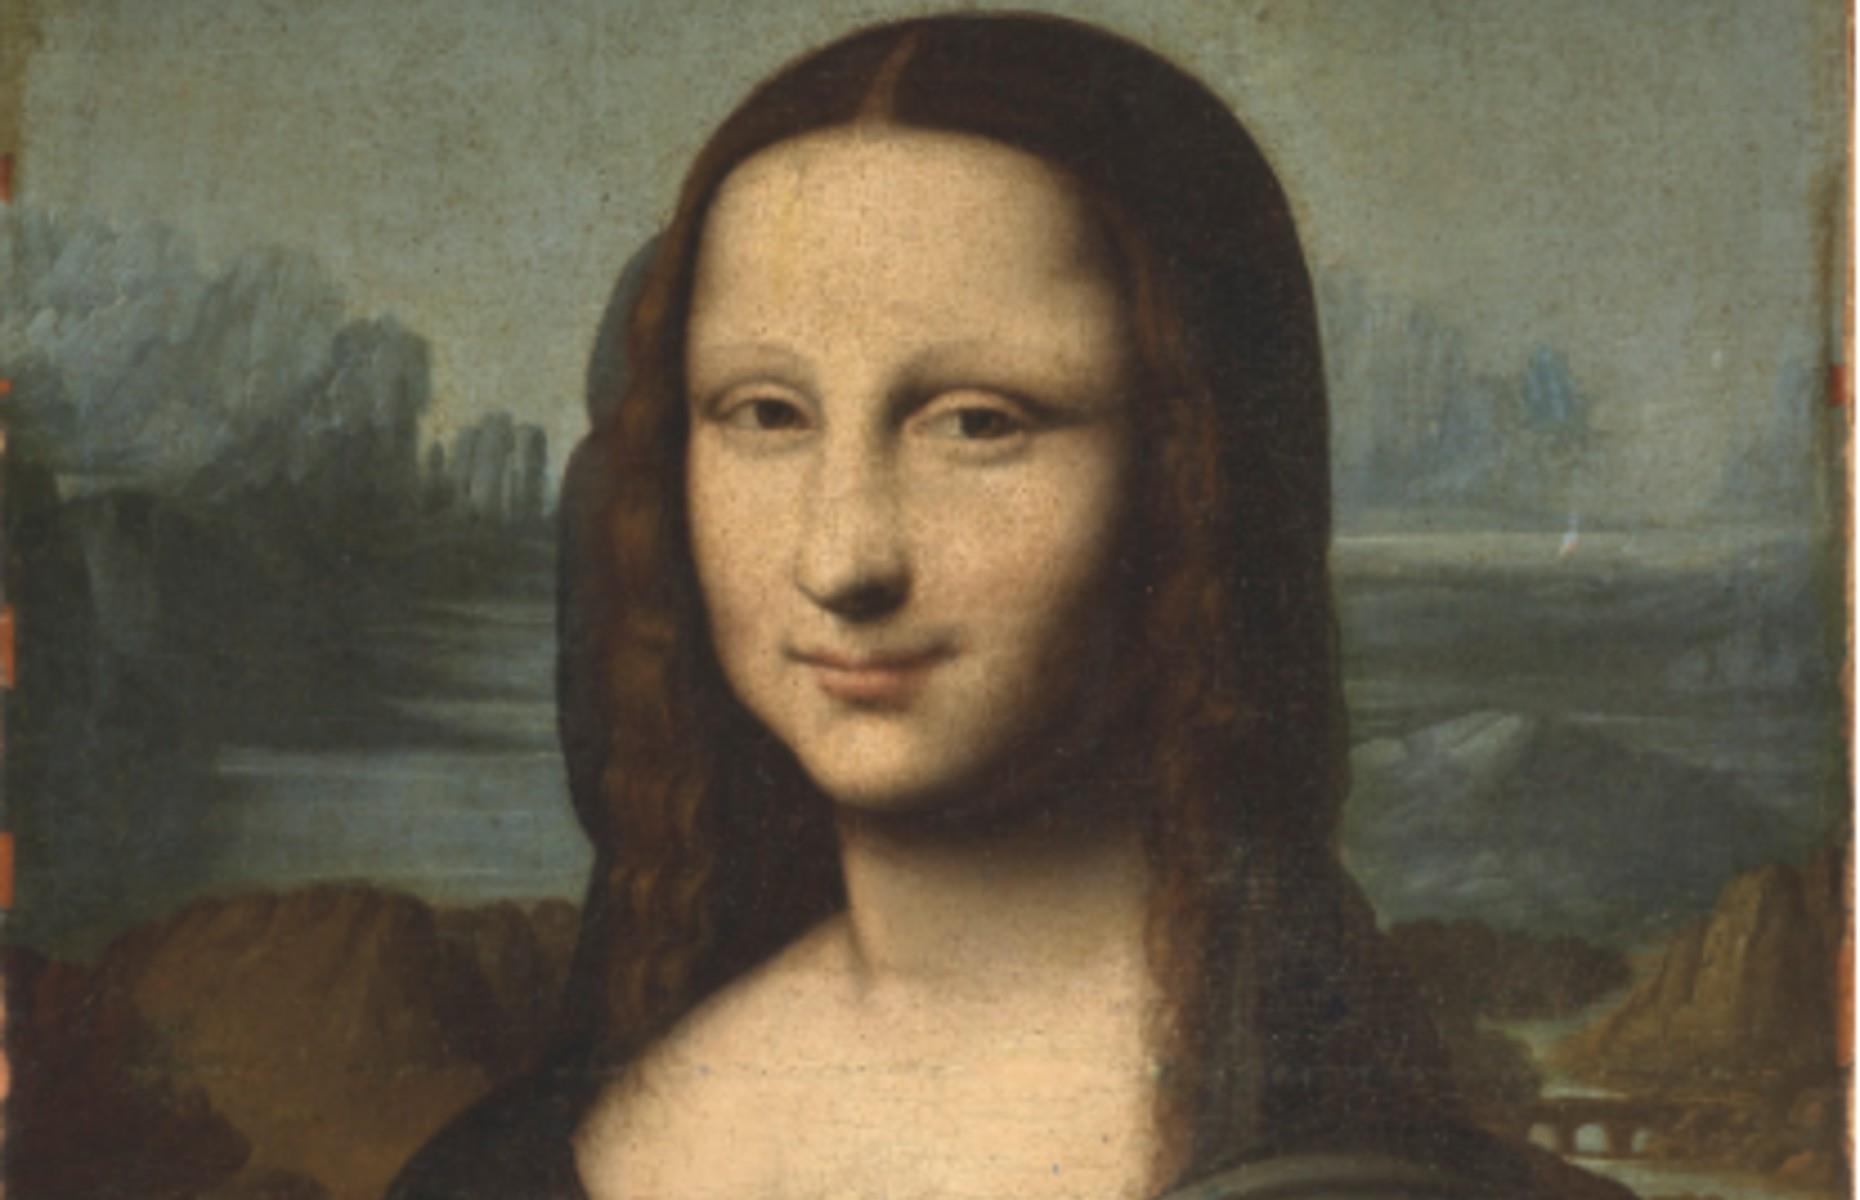 <p>The claims were taken seriously by some in the art community, however they later were disproved. The ‘Hekking <em>Mona Lisa</em>’, as it has come to be known, has been dated by experts as early 17th century. It’s believed the convincing replica was created by a fan of da Vinci.</p>